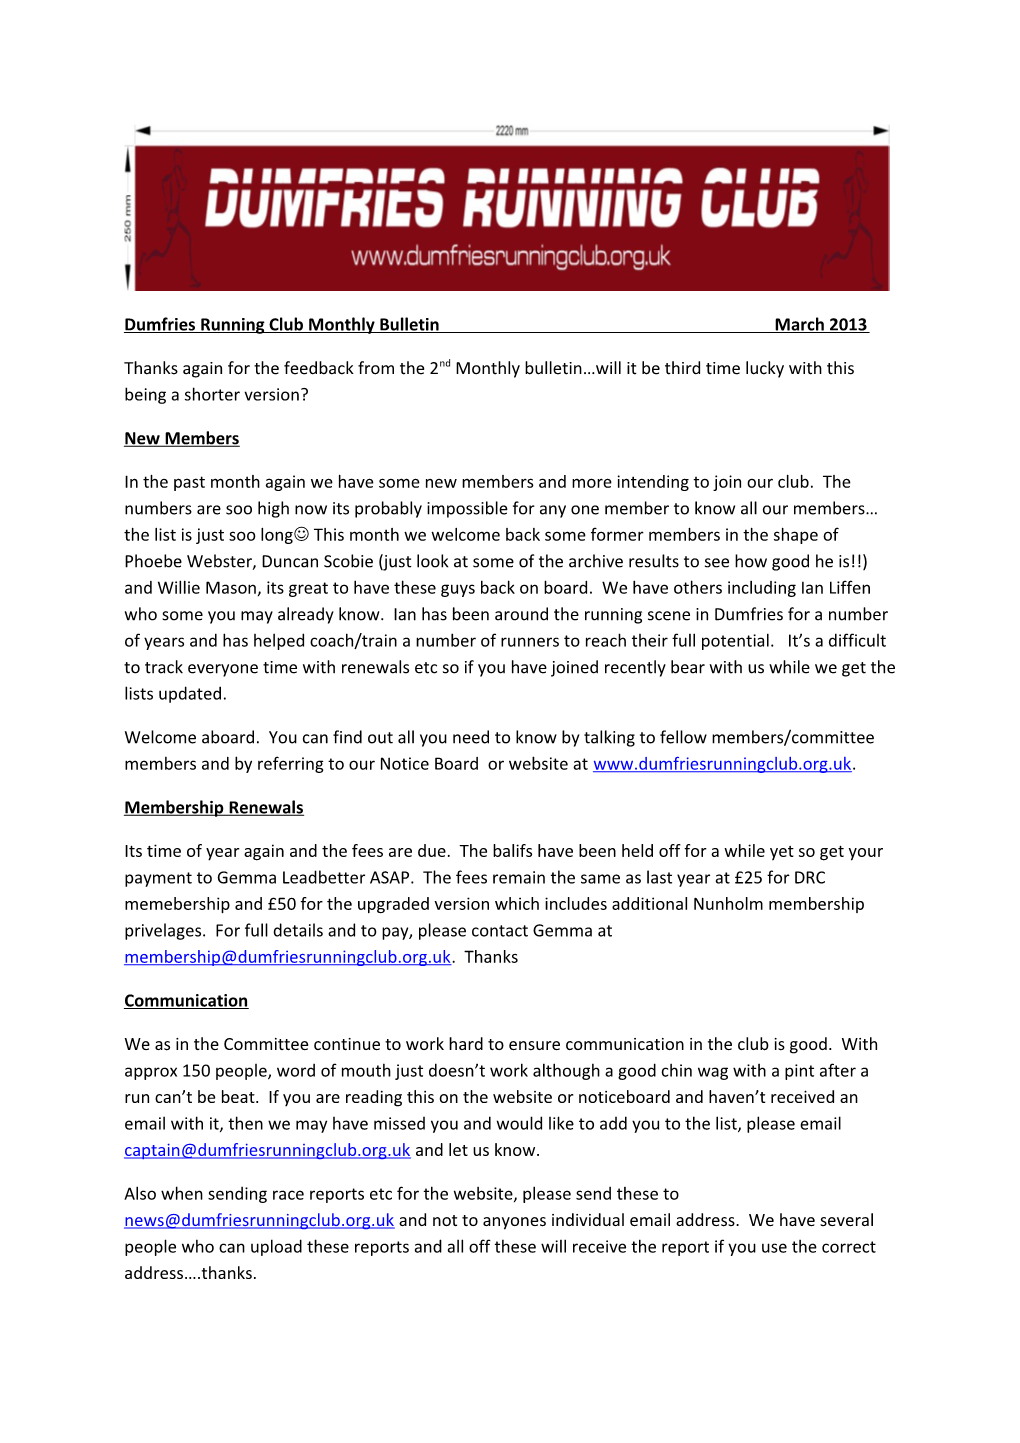 Dumfries Running Club Monthly Bulletin March 2013